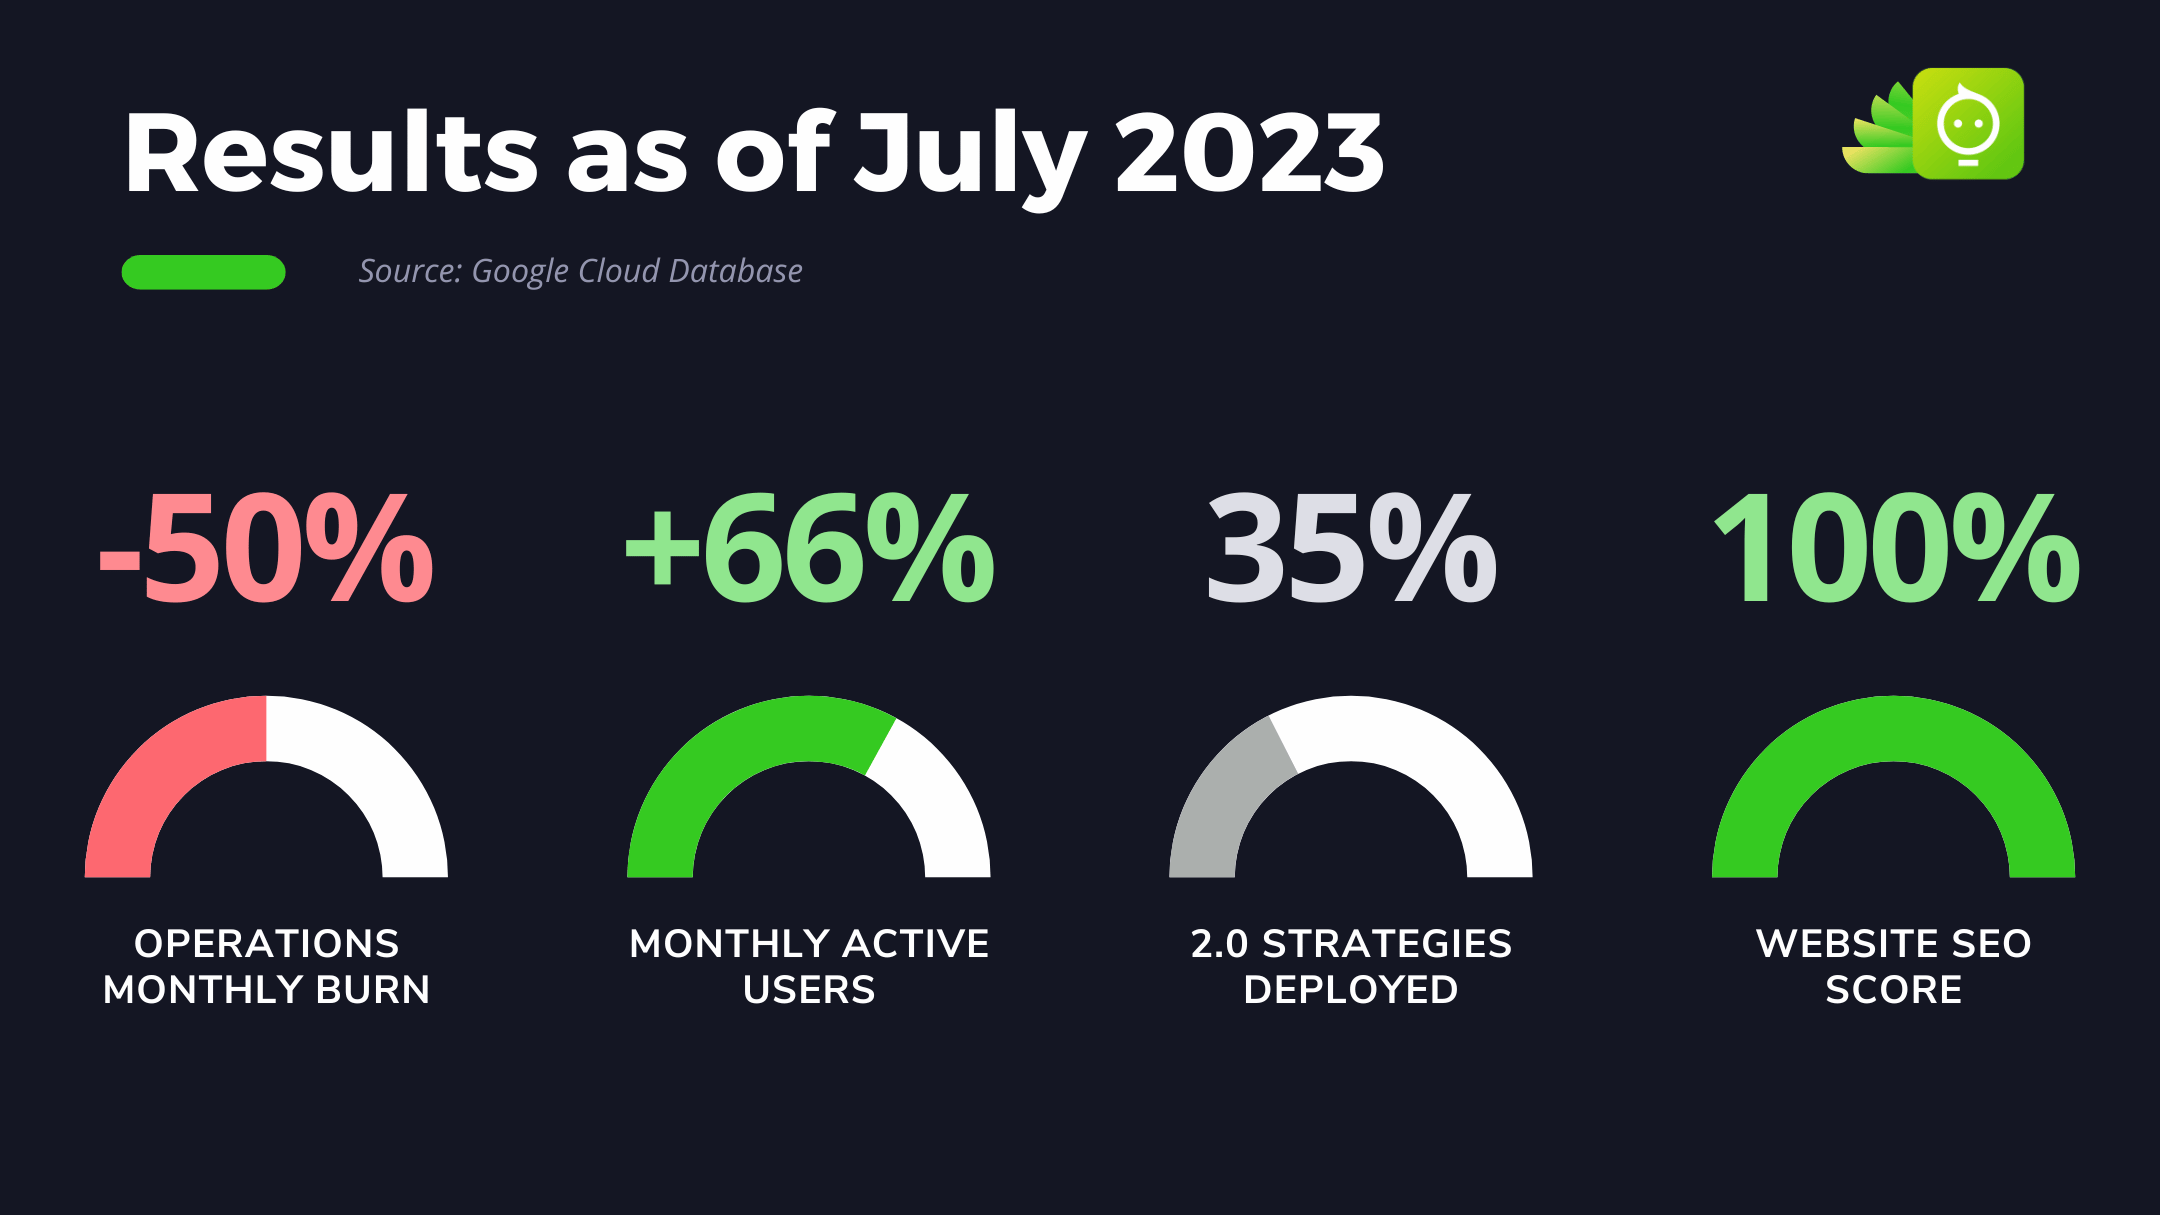 2023 Year to Date Results at 35% deployment of 2.0 Strategies